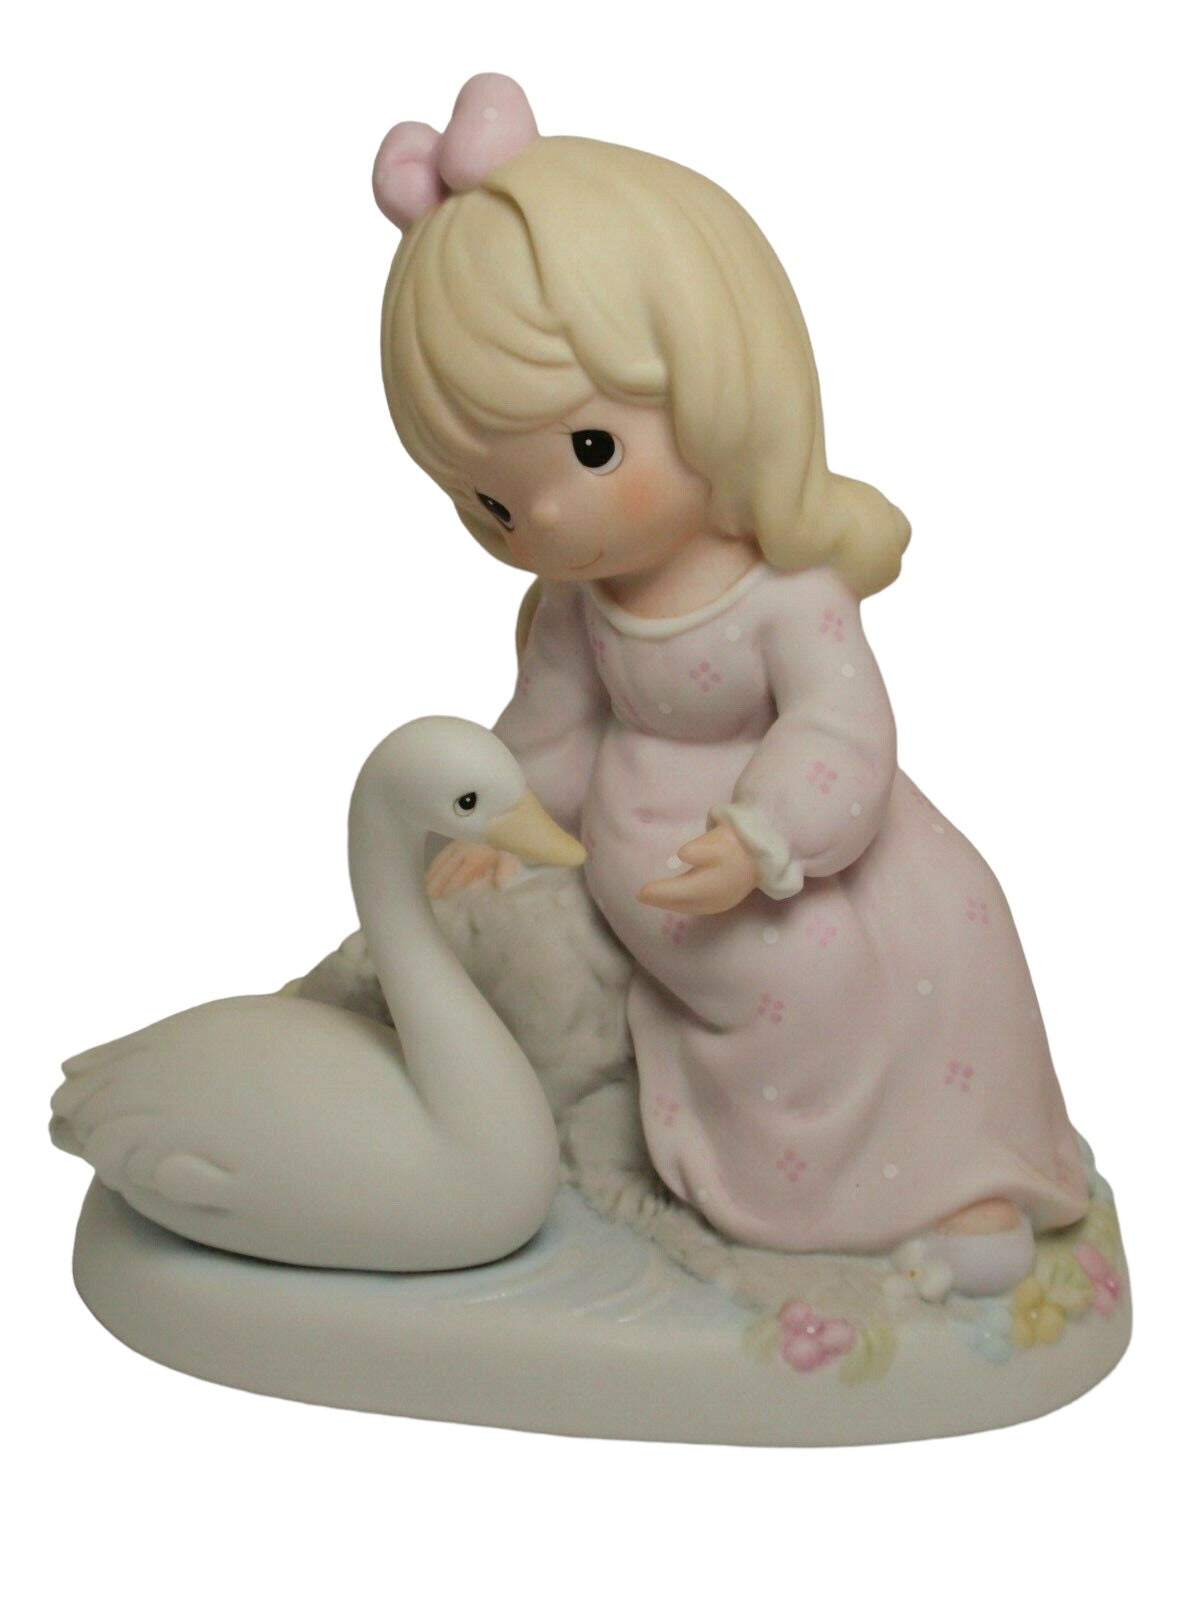 Blessed Are They With A Caring Heart - Precious Moments Figurine 163724